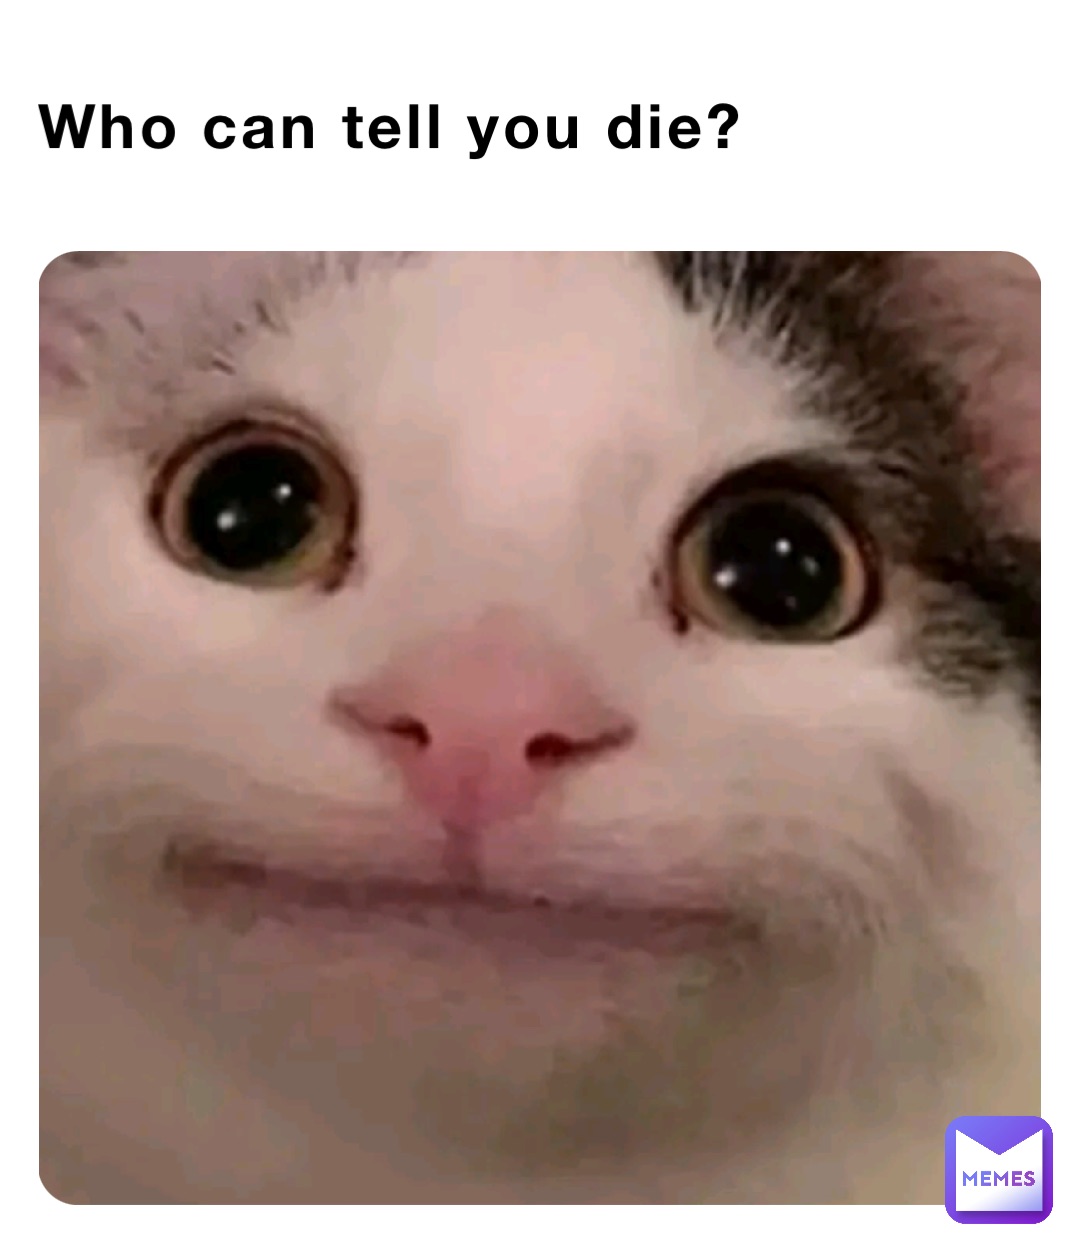 Who can tell you die?